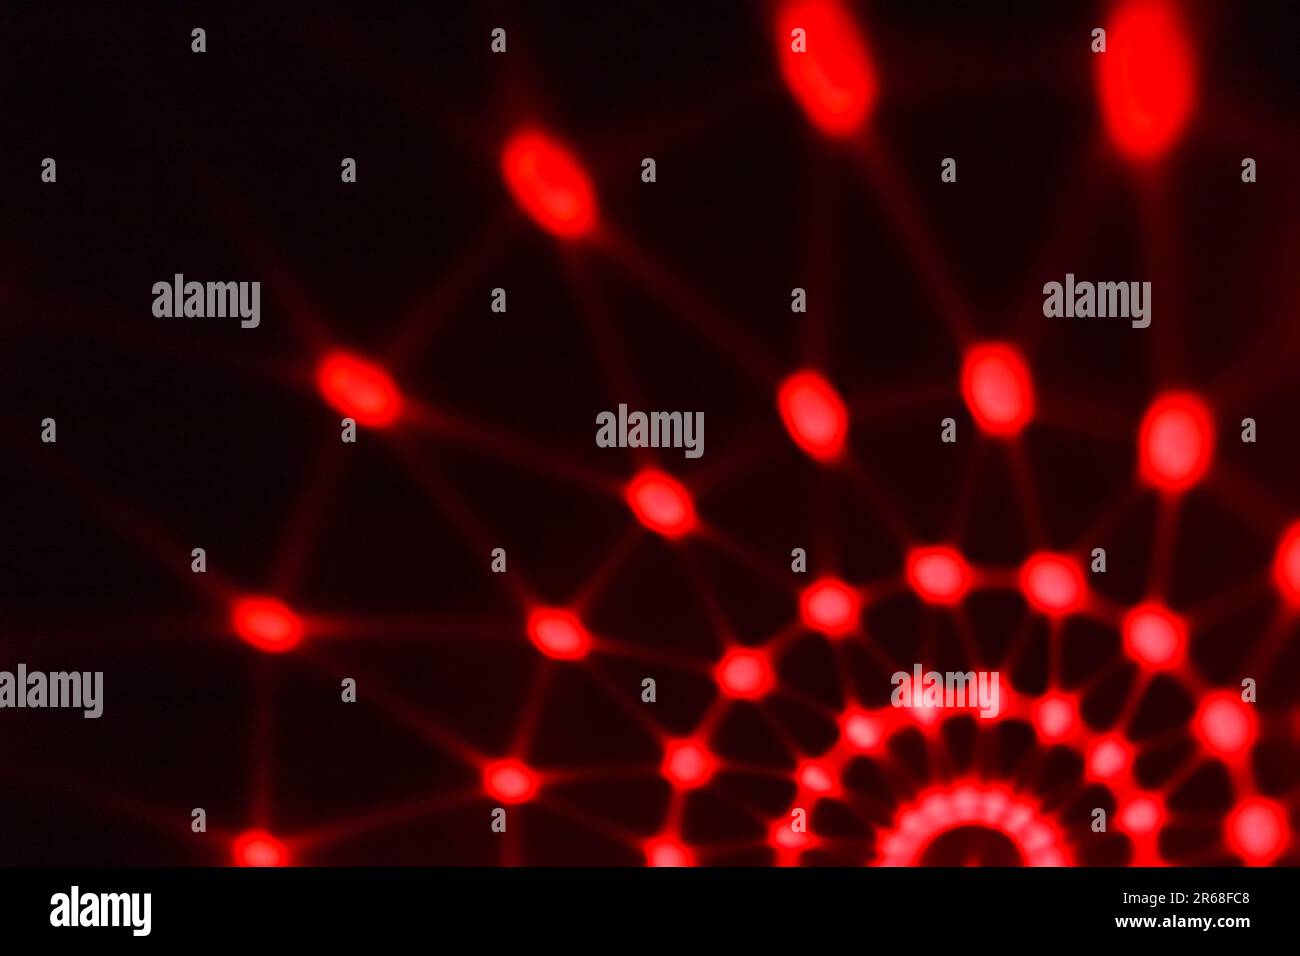 Abstraction in the form of red lights on a dark background. Night concept. Stock Photo